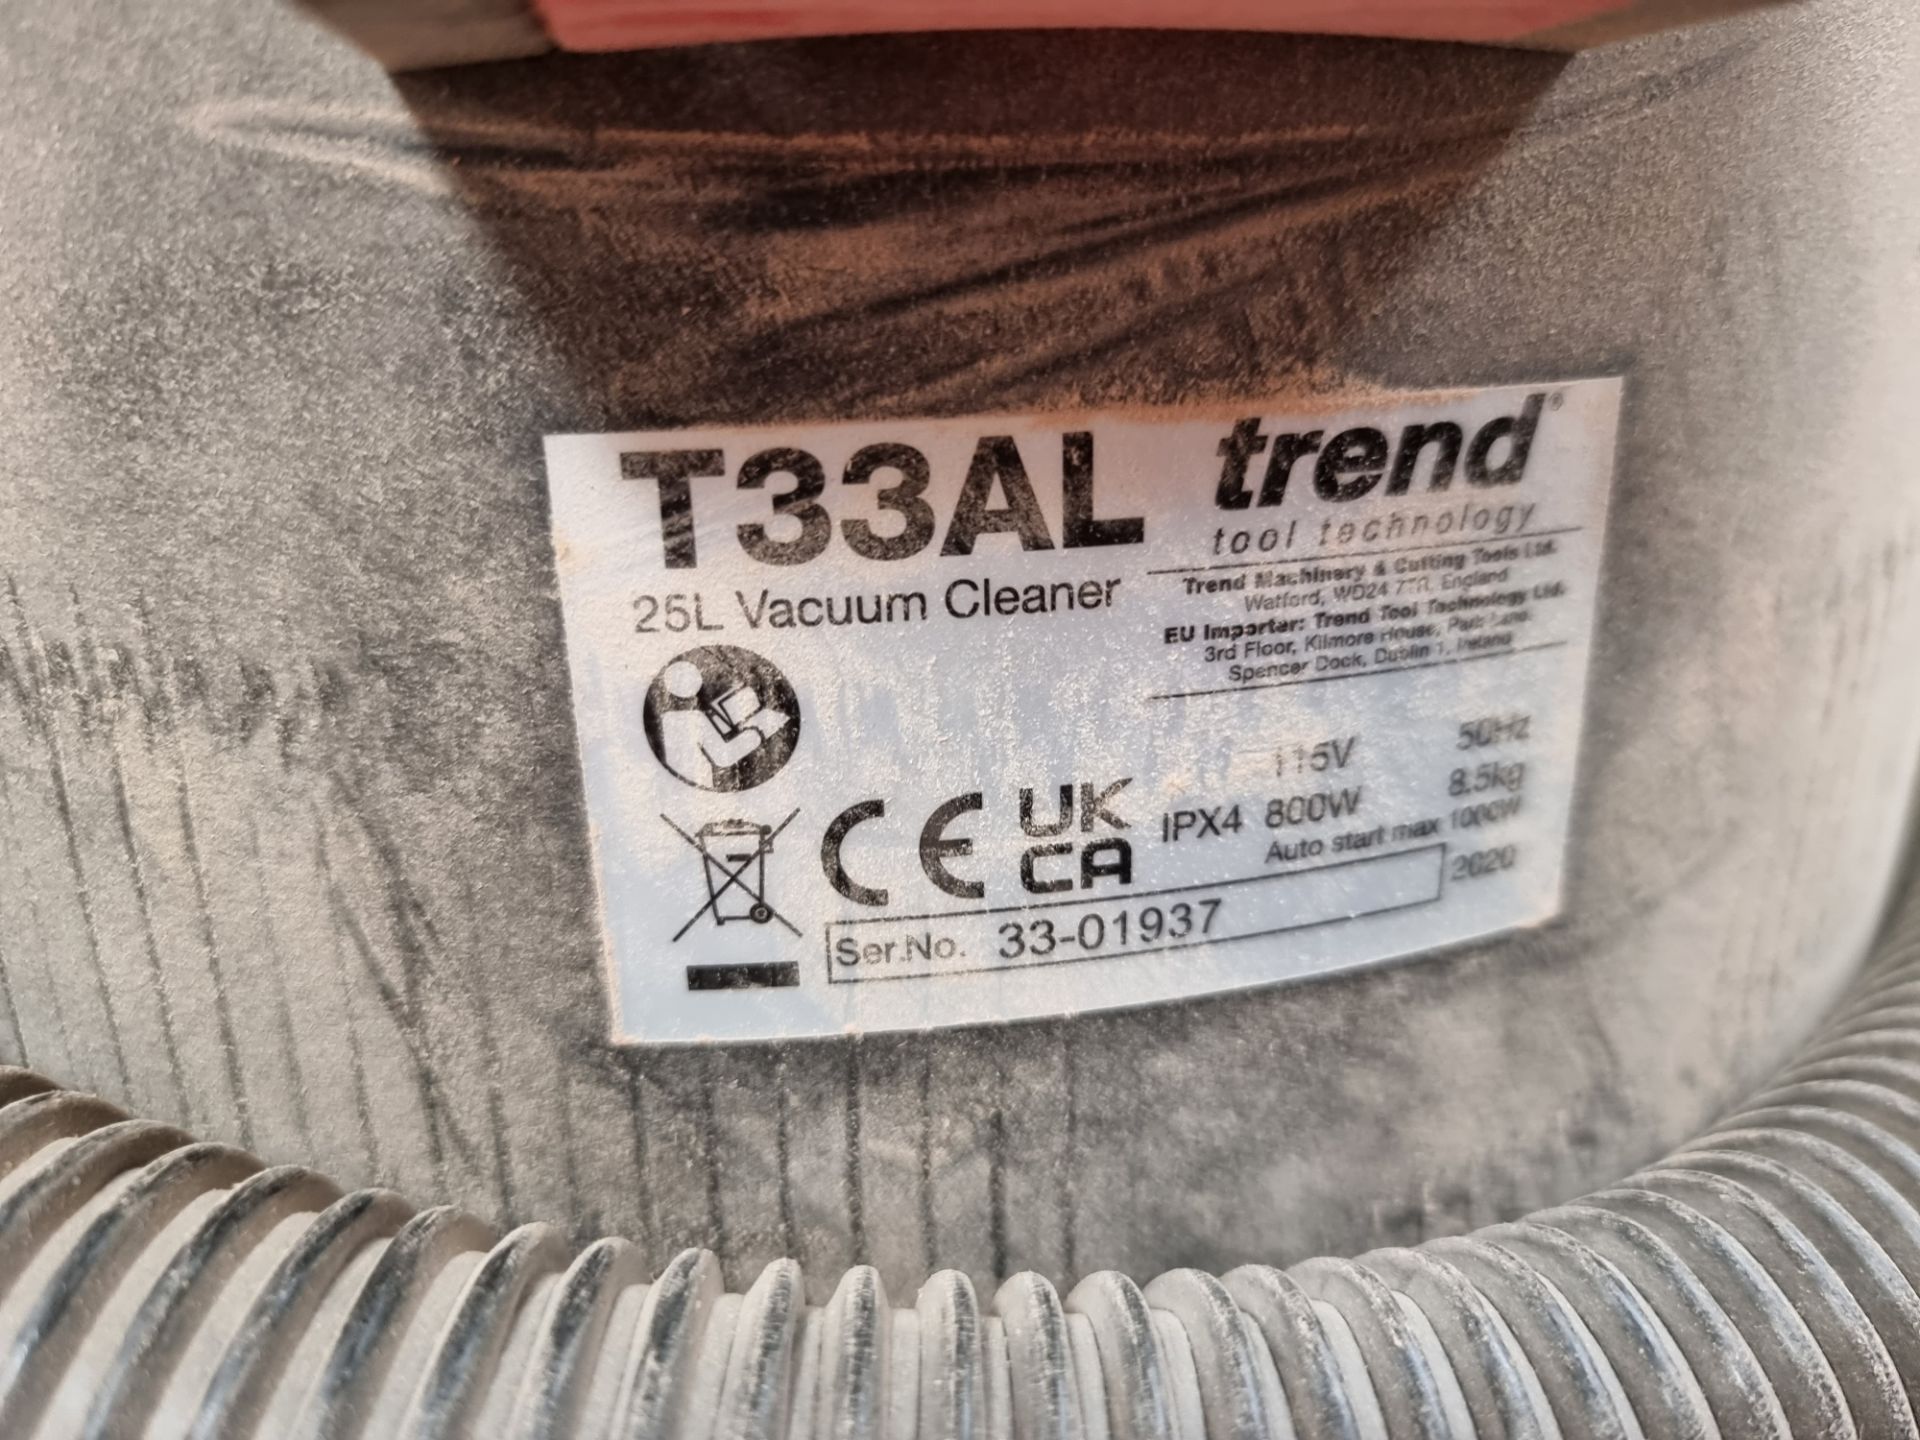 3: Trend Tool Technology T33AL 25L Vacuum Cleaner. Serial Number: 33-01196, 33-01937, 3-00149 Year o - Image 3 of 5